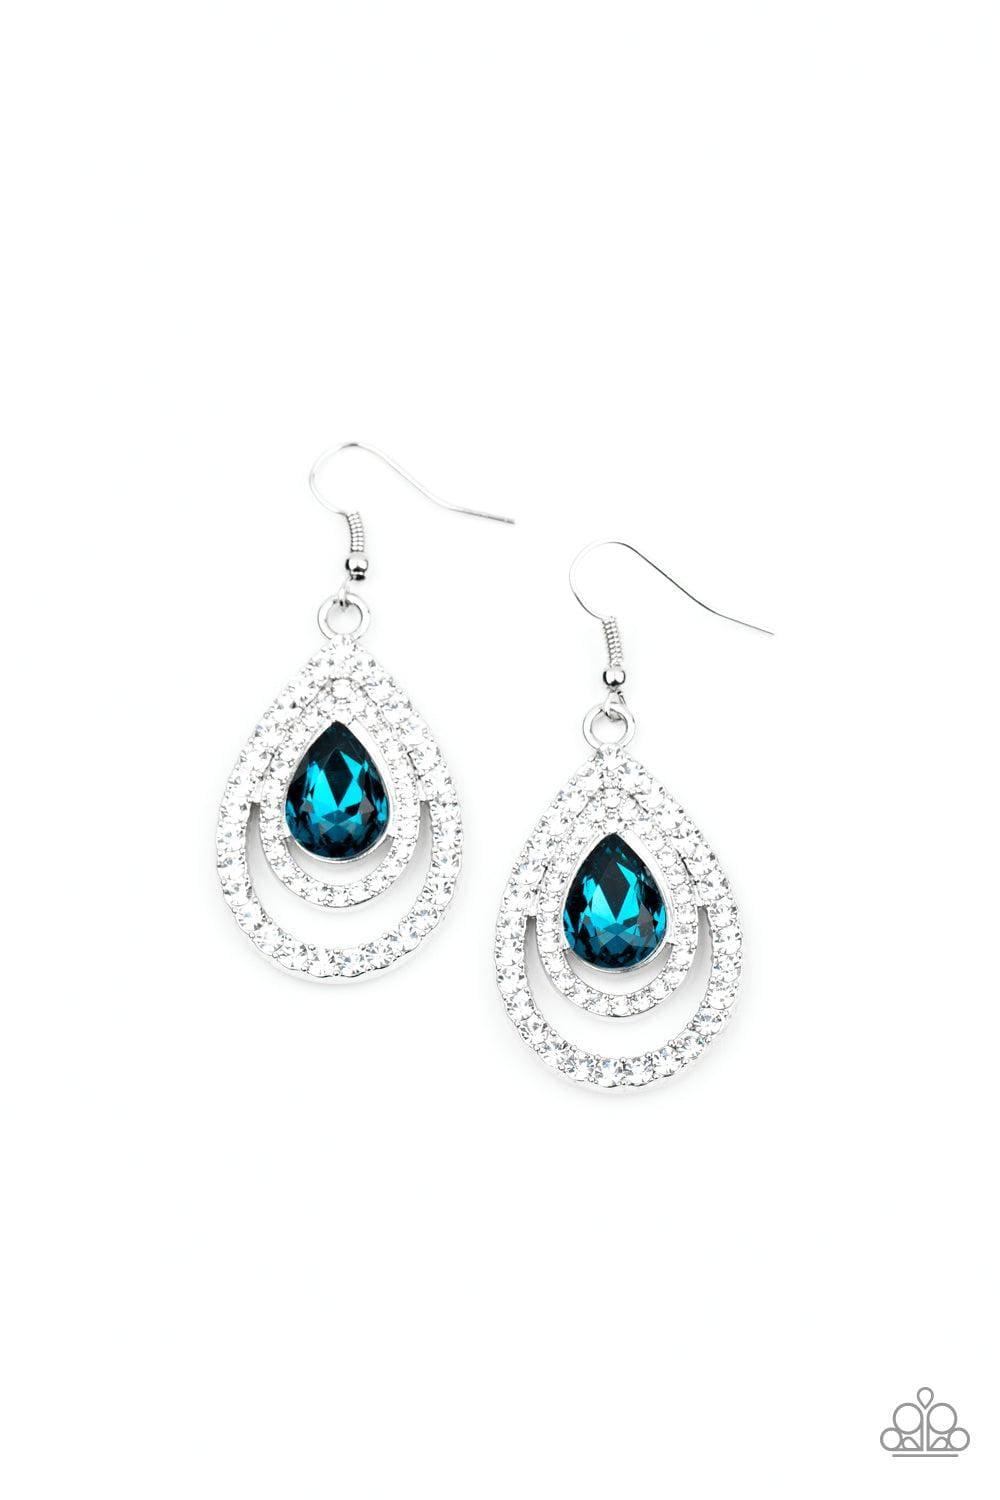 Paparazzi Accessories - So The Story Glows - Blue Earrings - Bling by JessieK